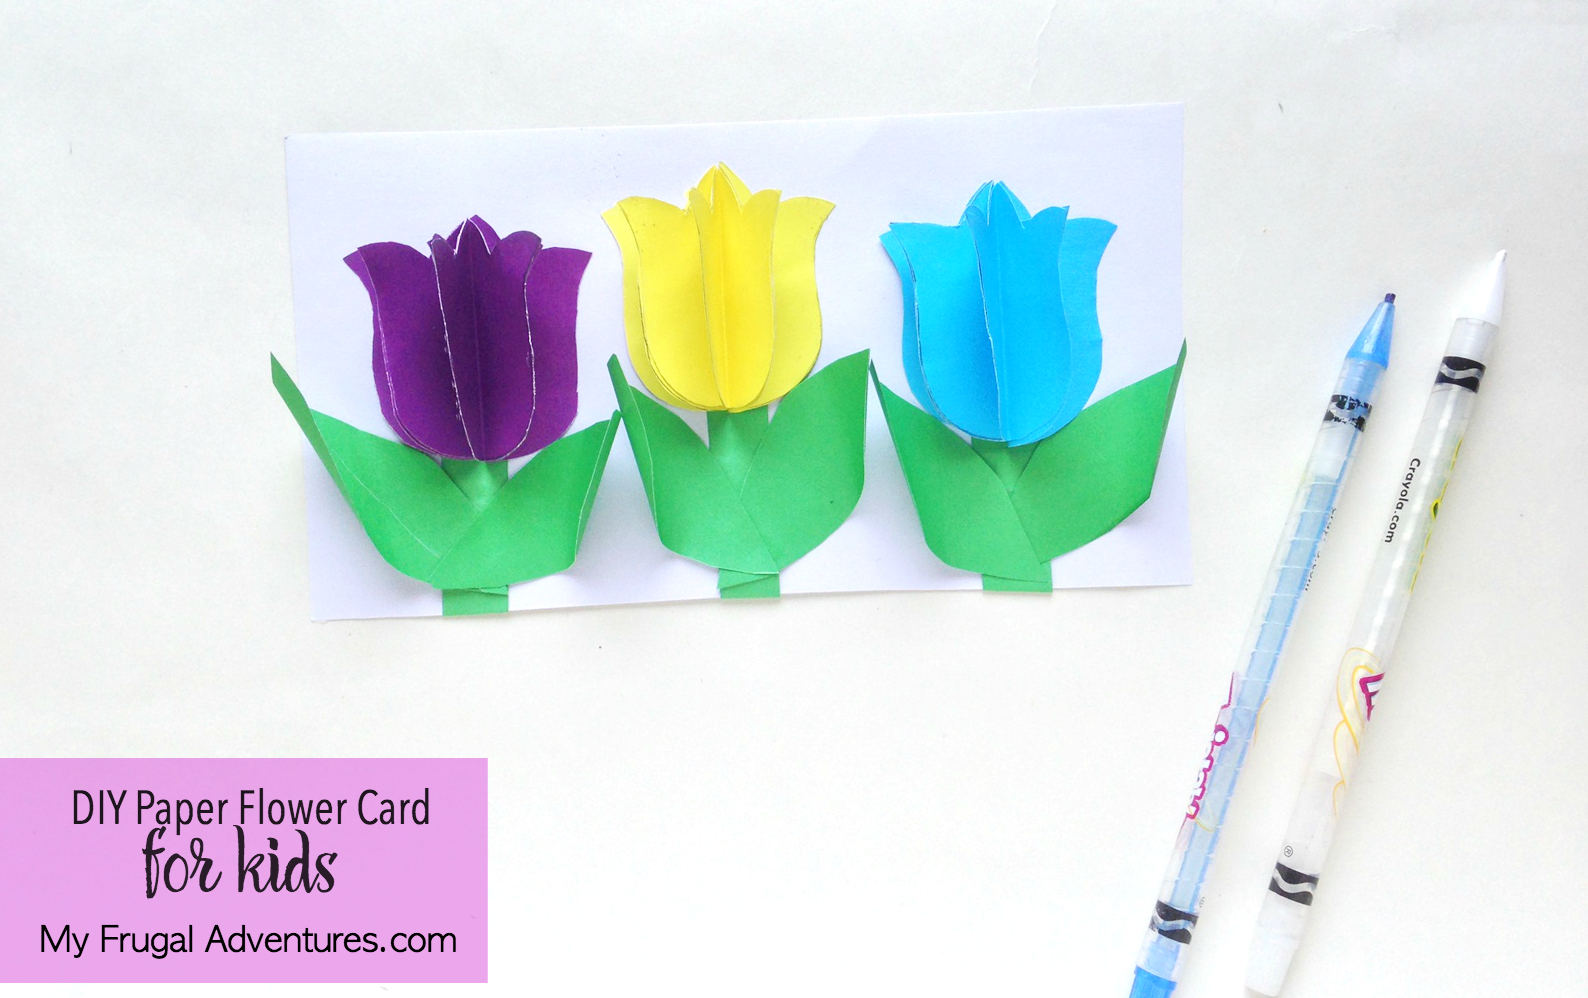 Paper flower card for children on My Frugal Adventures.com. Simple DIY card for children to make for Mother's Day, Grandparents or teacher appreciation week.